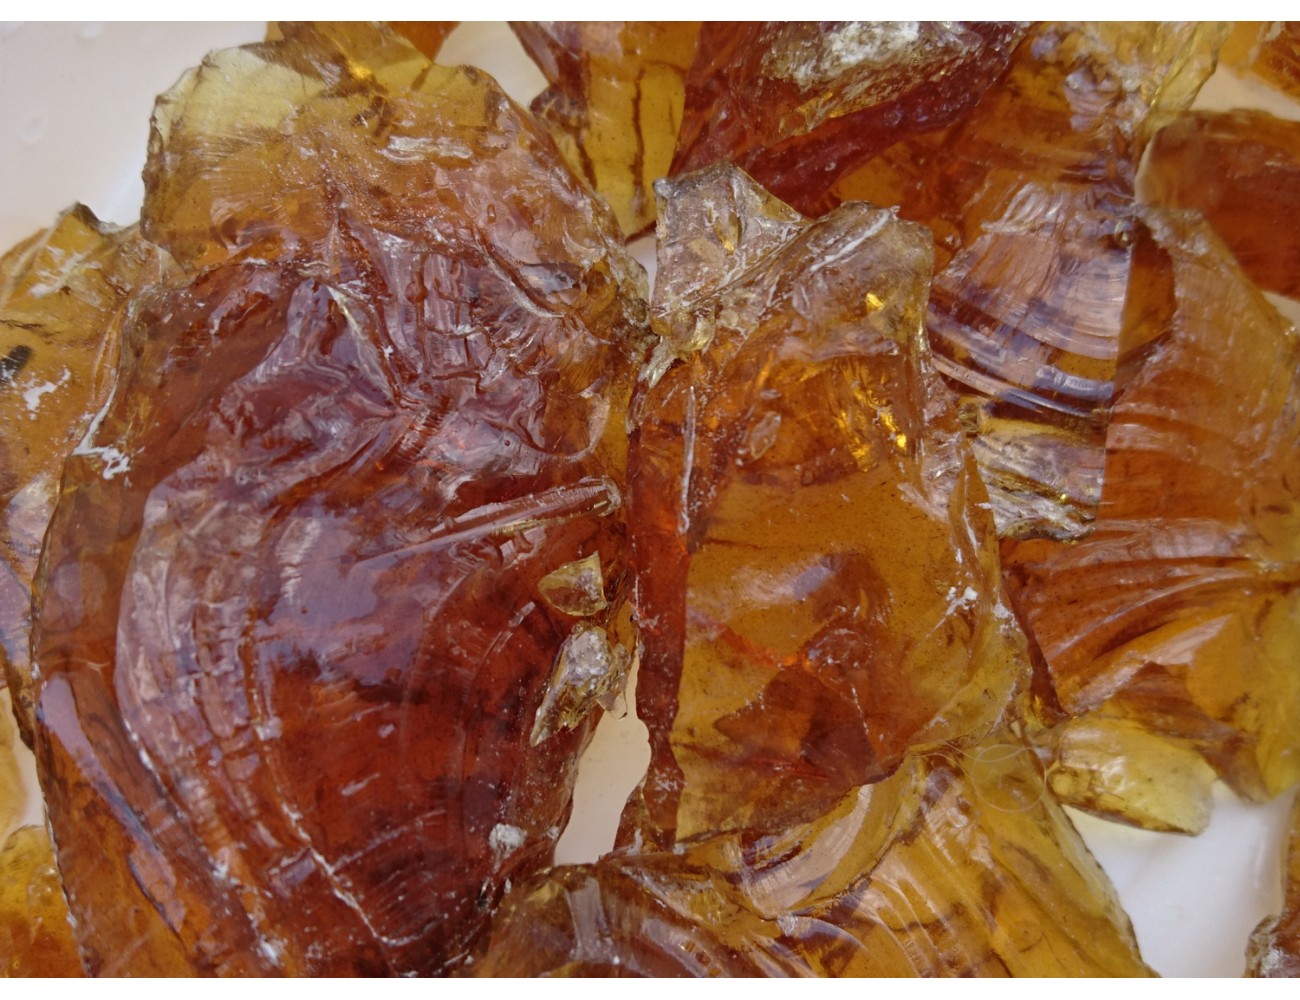 Pine Rosin - Tree Resin for Making Beeswax Food Wraps, Food Grade Pine  Resin Natural Hand Grip Enhancer Gum Nugget Rock Form - Buy Online -  169006379